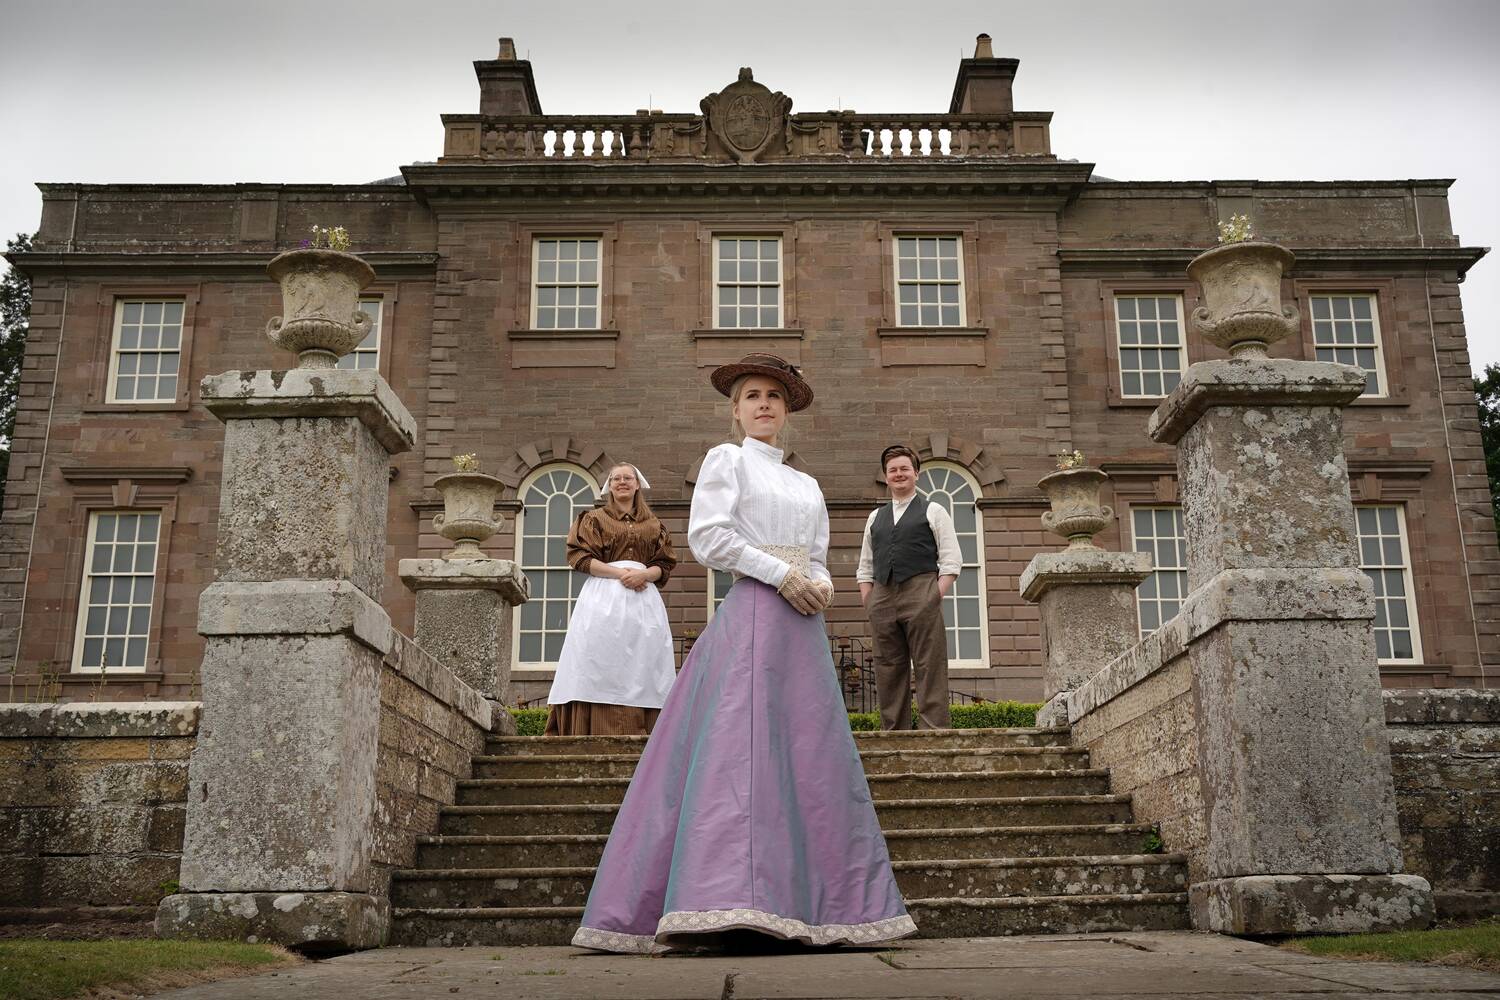 Three costumed guides dressed in various Victorian outfits​ stand on the stone steps leading up to a grand Georgian mansion house. There is a cook on the left, a well-to-do young woman in the centre and an estate worker on the right. Stone urns with pretty bedding plants line the staircase.